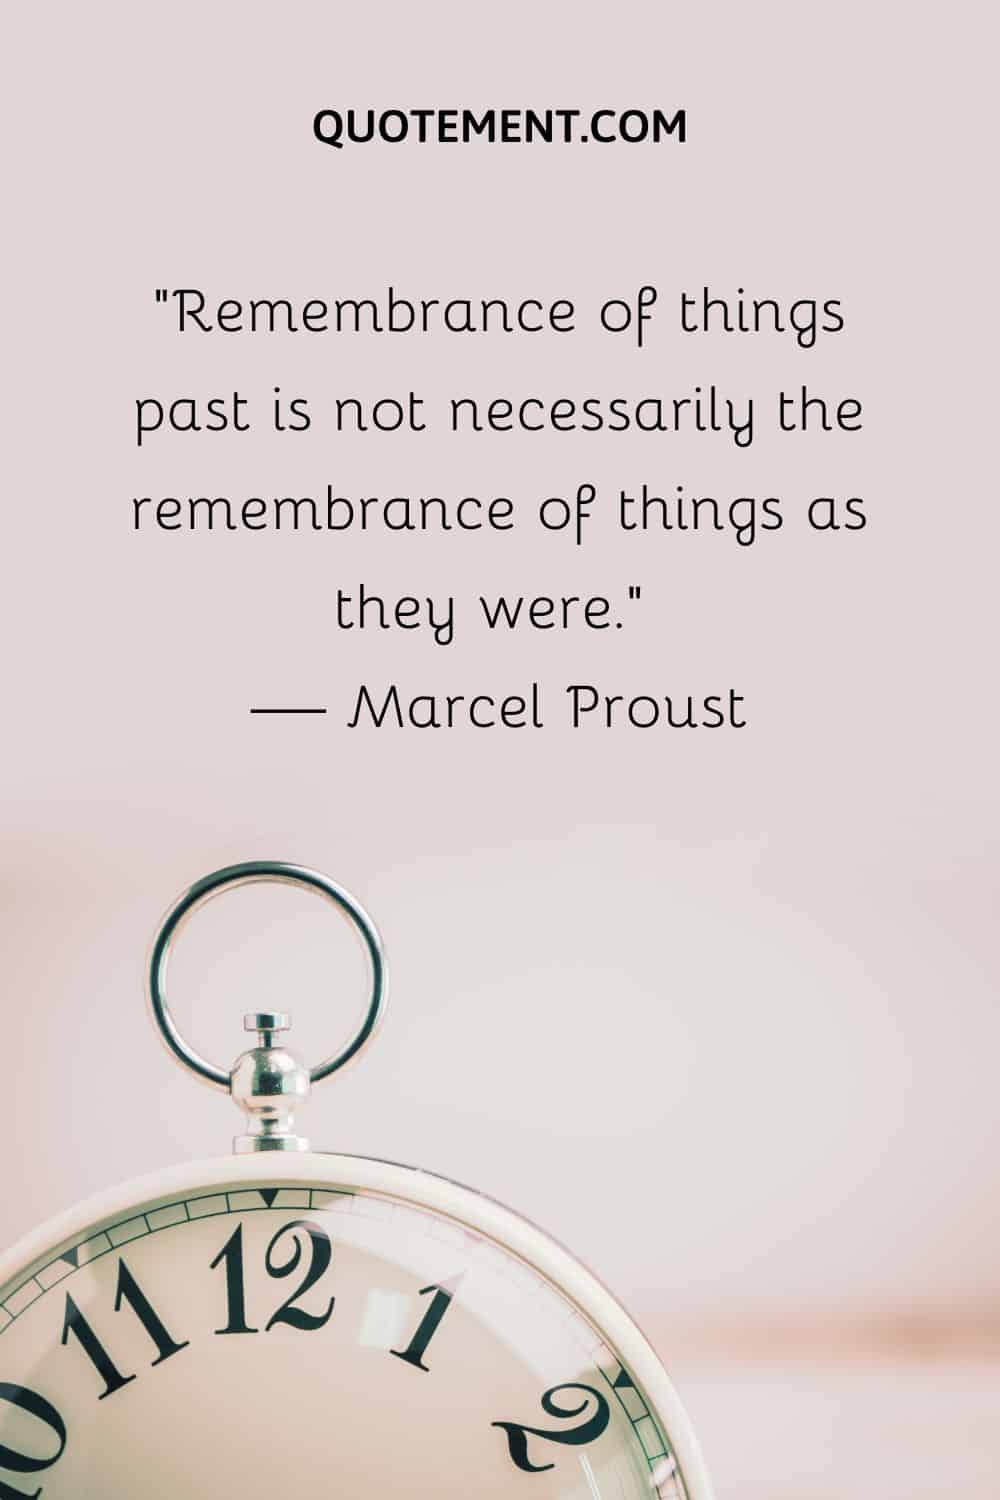 Remembrance of things past is not necessarily the remembrance of things as they were